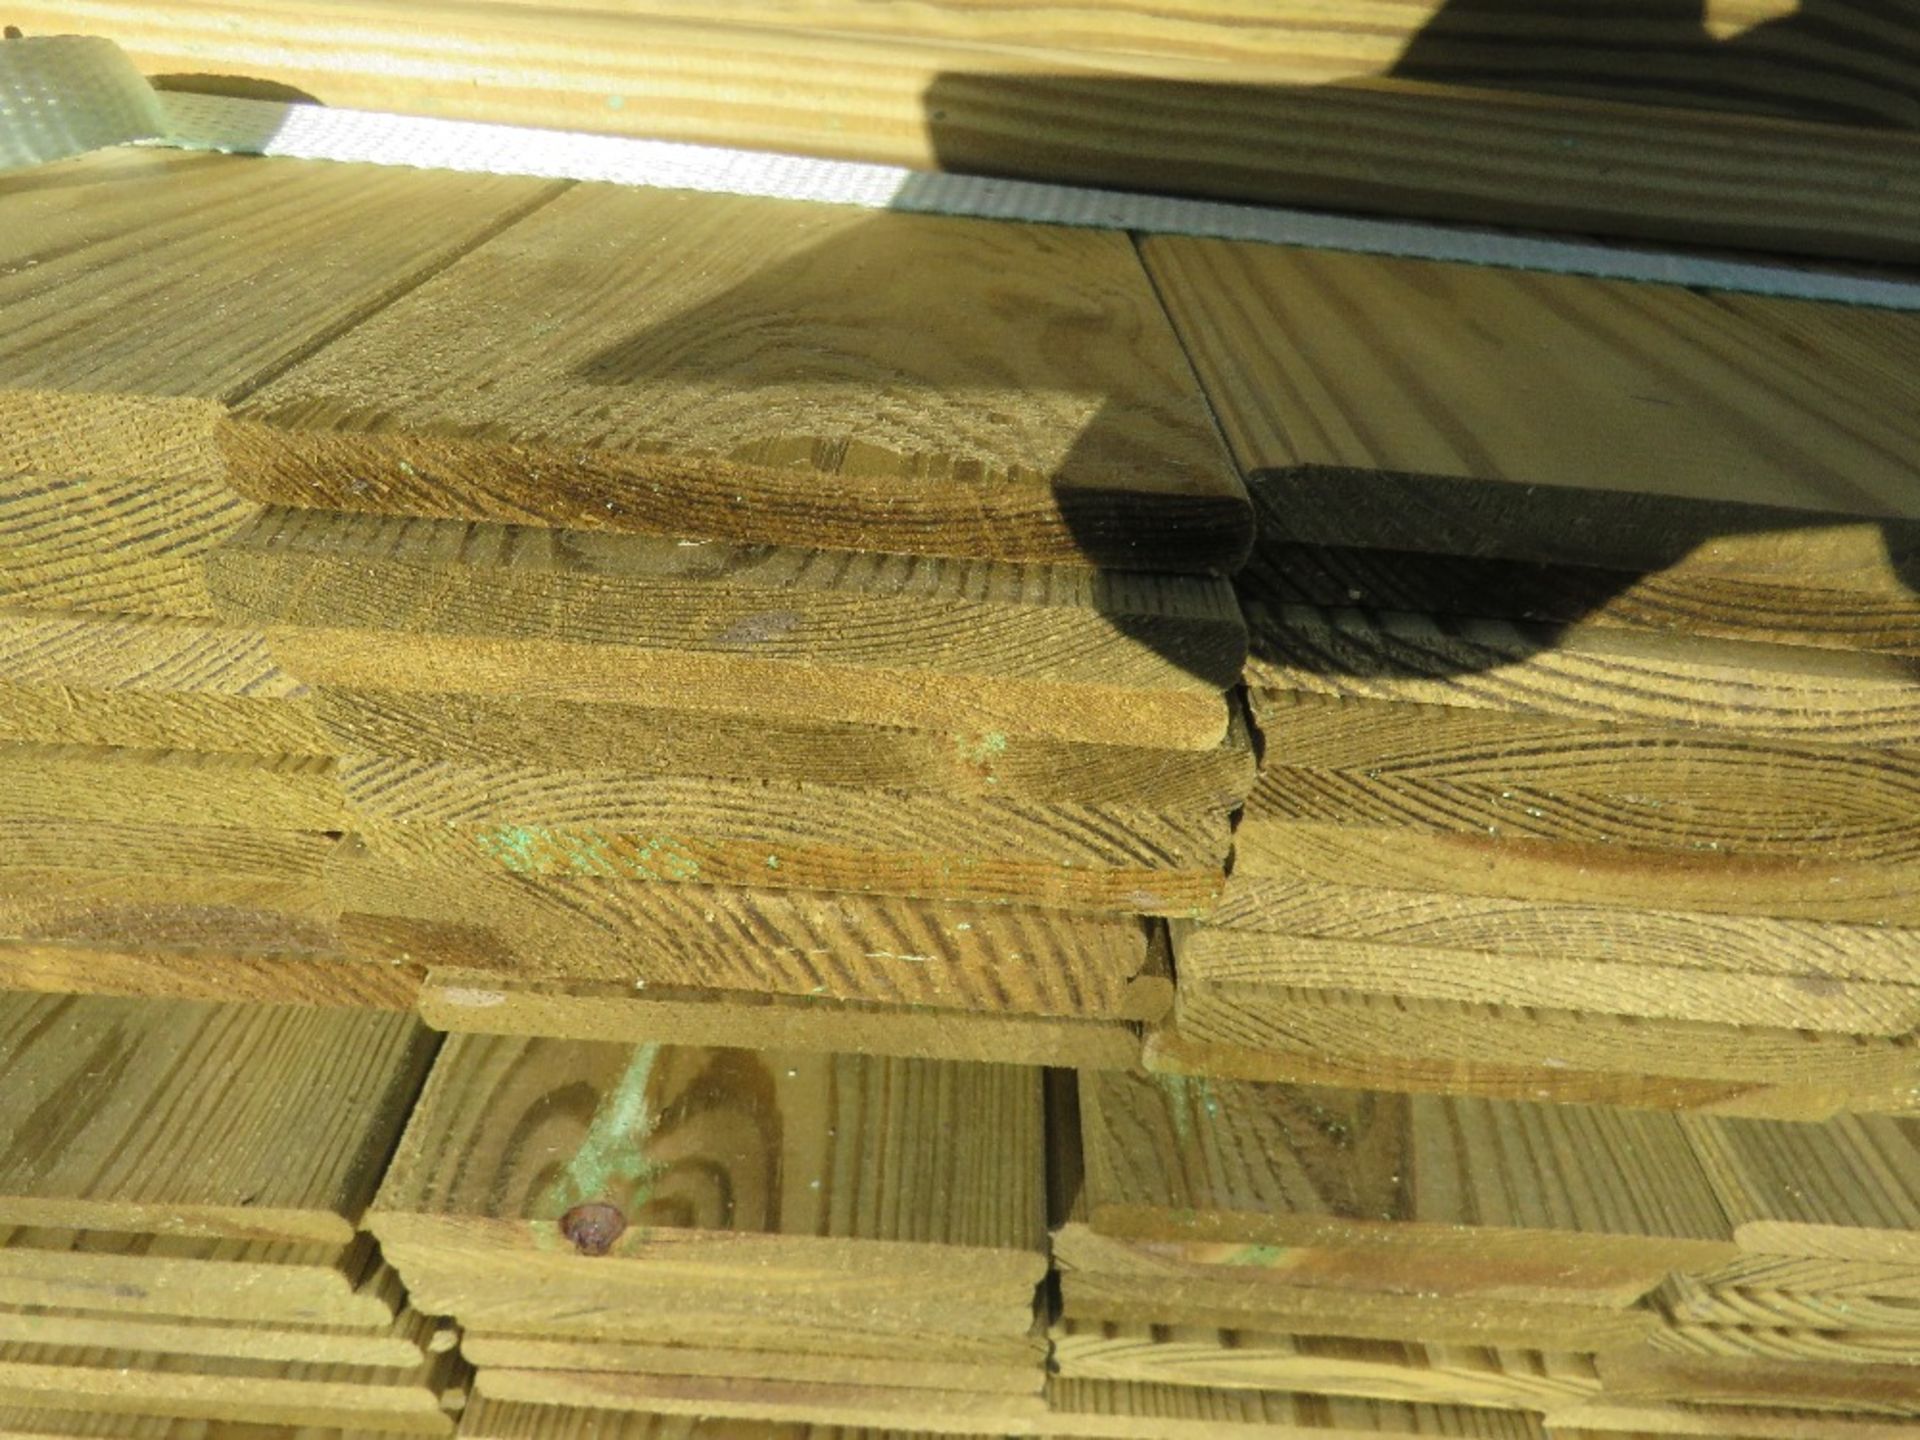 LARGE BUNDLE OF PRESSURE TREATED HIT AND MISSTIMBER CLADDING: 1.2M LENGTH X 10CM WIDTH APPROX. - Image 3 of 3